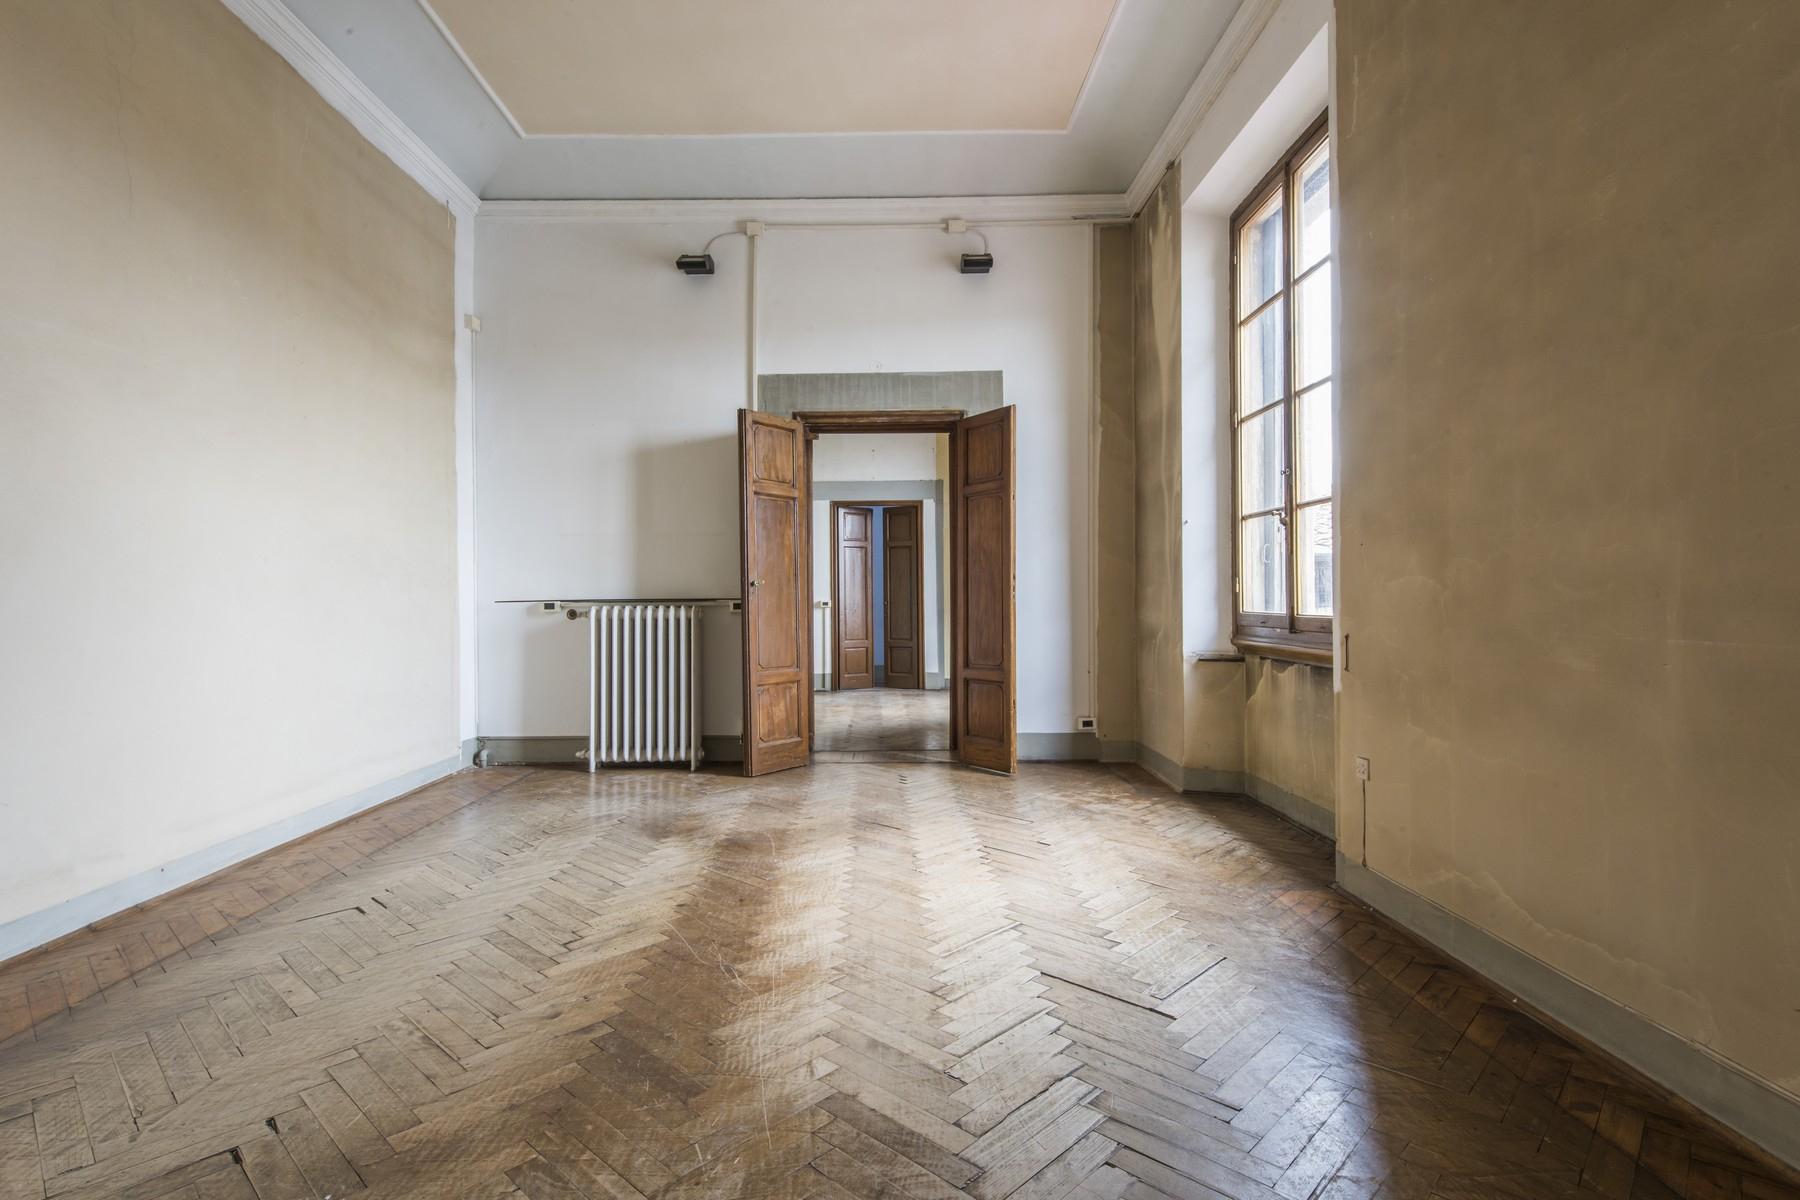 Magnificent 520sqm penthouse in a historic Florentine palazzo. - 17